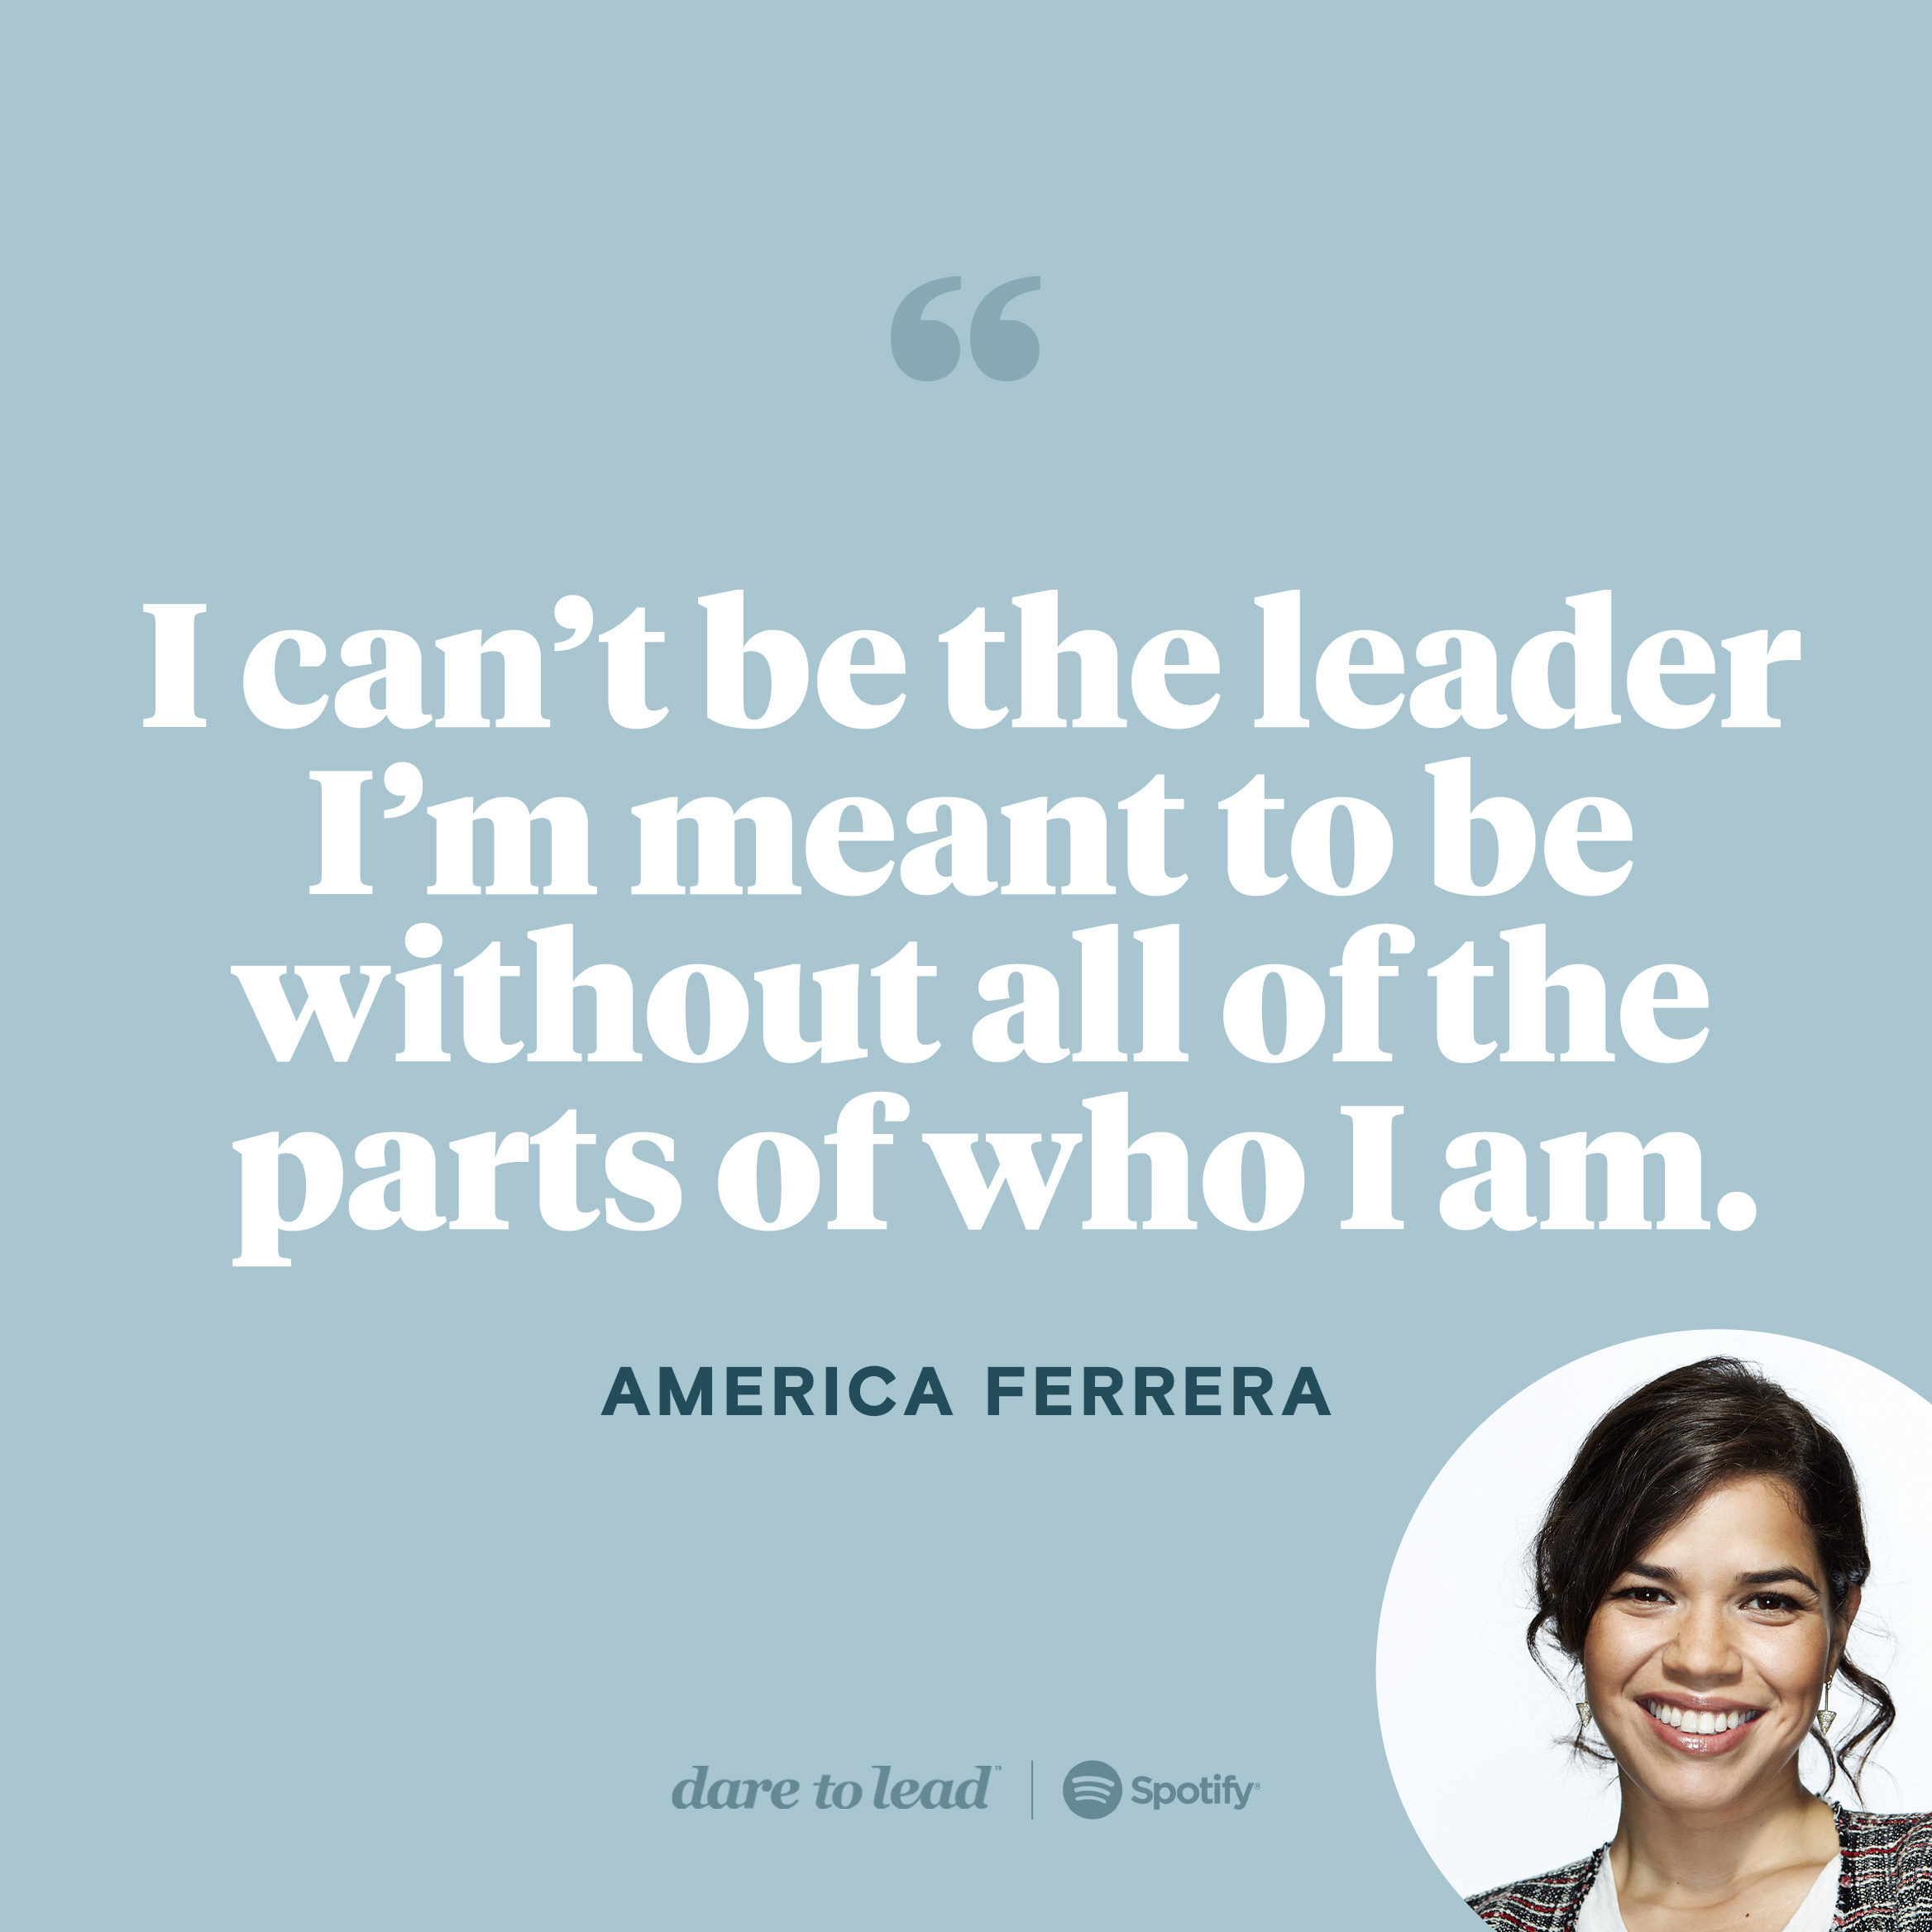 Latest Unlocking Us Episode with America Ferrera, listen on Spotify. A quote by America Ferrera: I can't be the leader I'm meant to be without all of the parts of who I am.